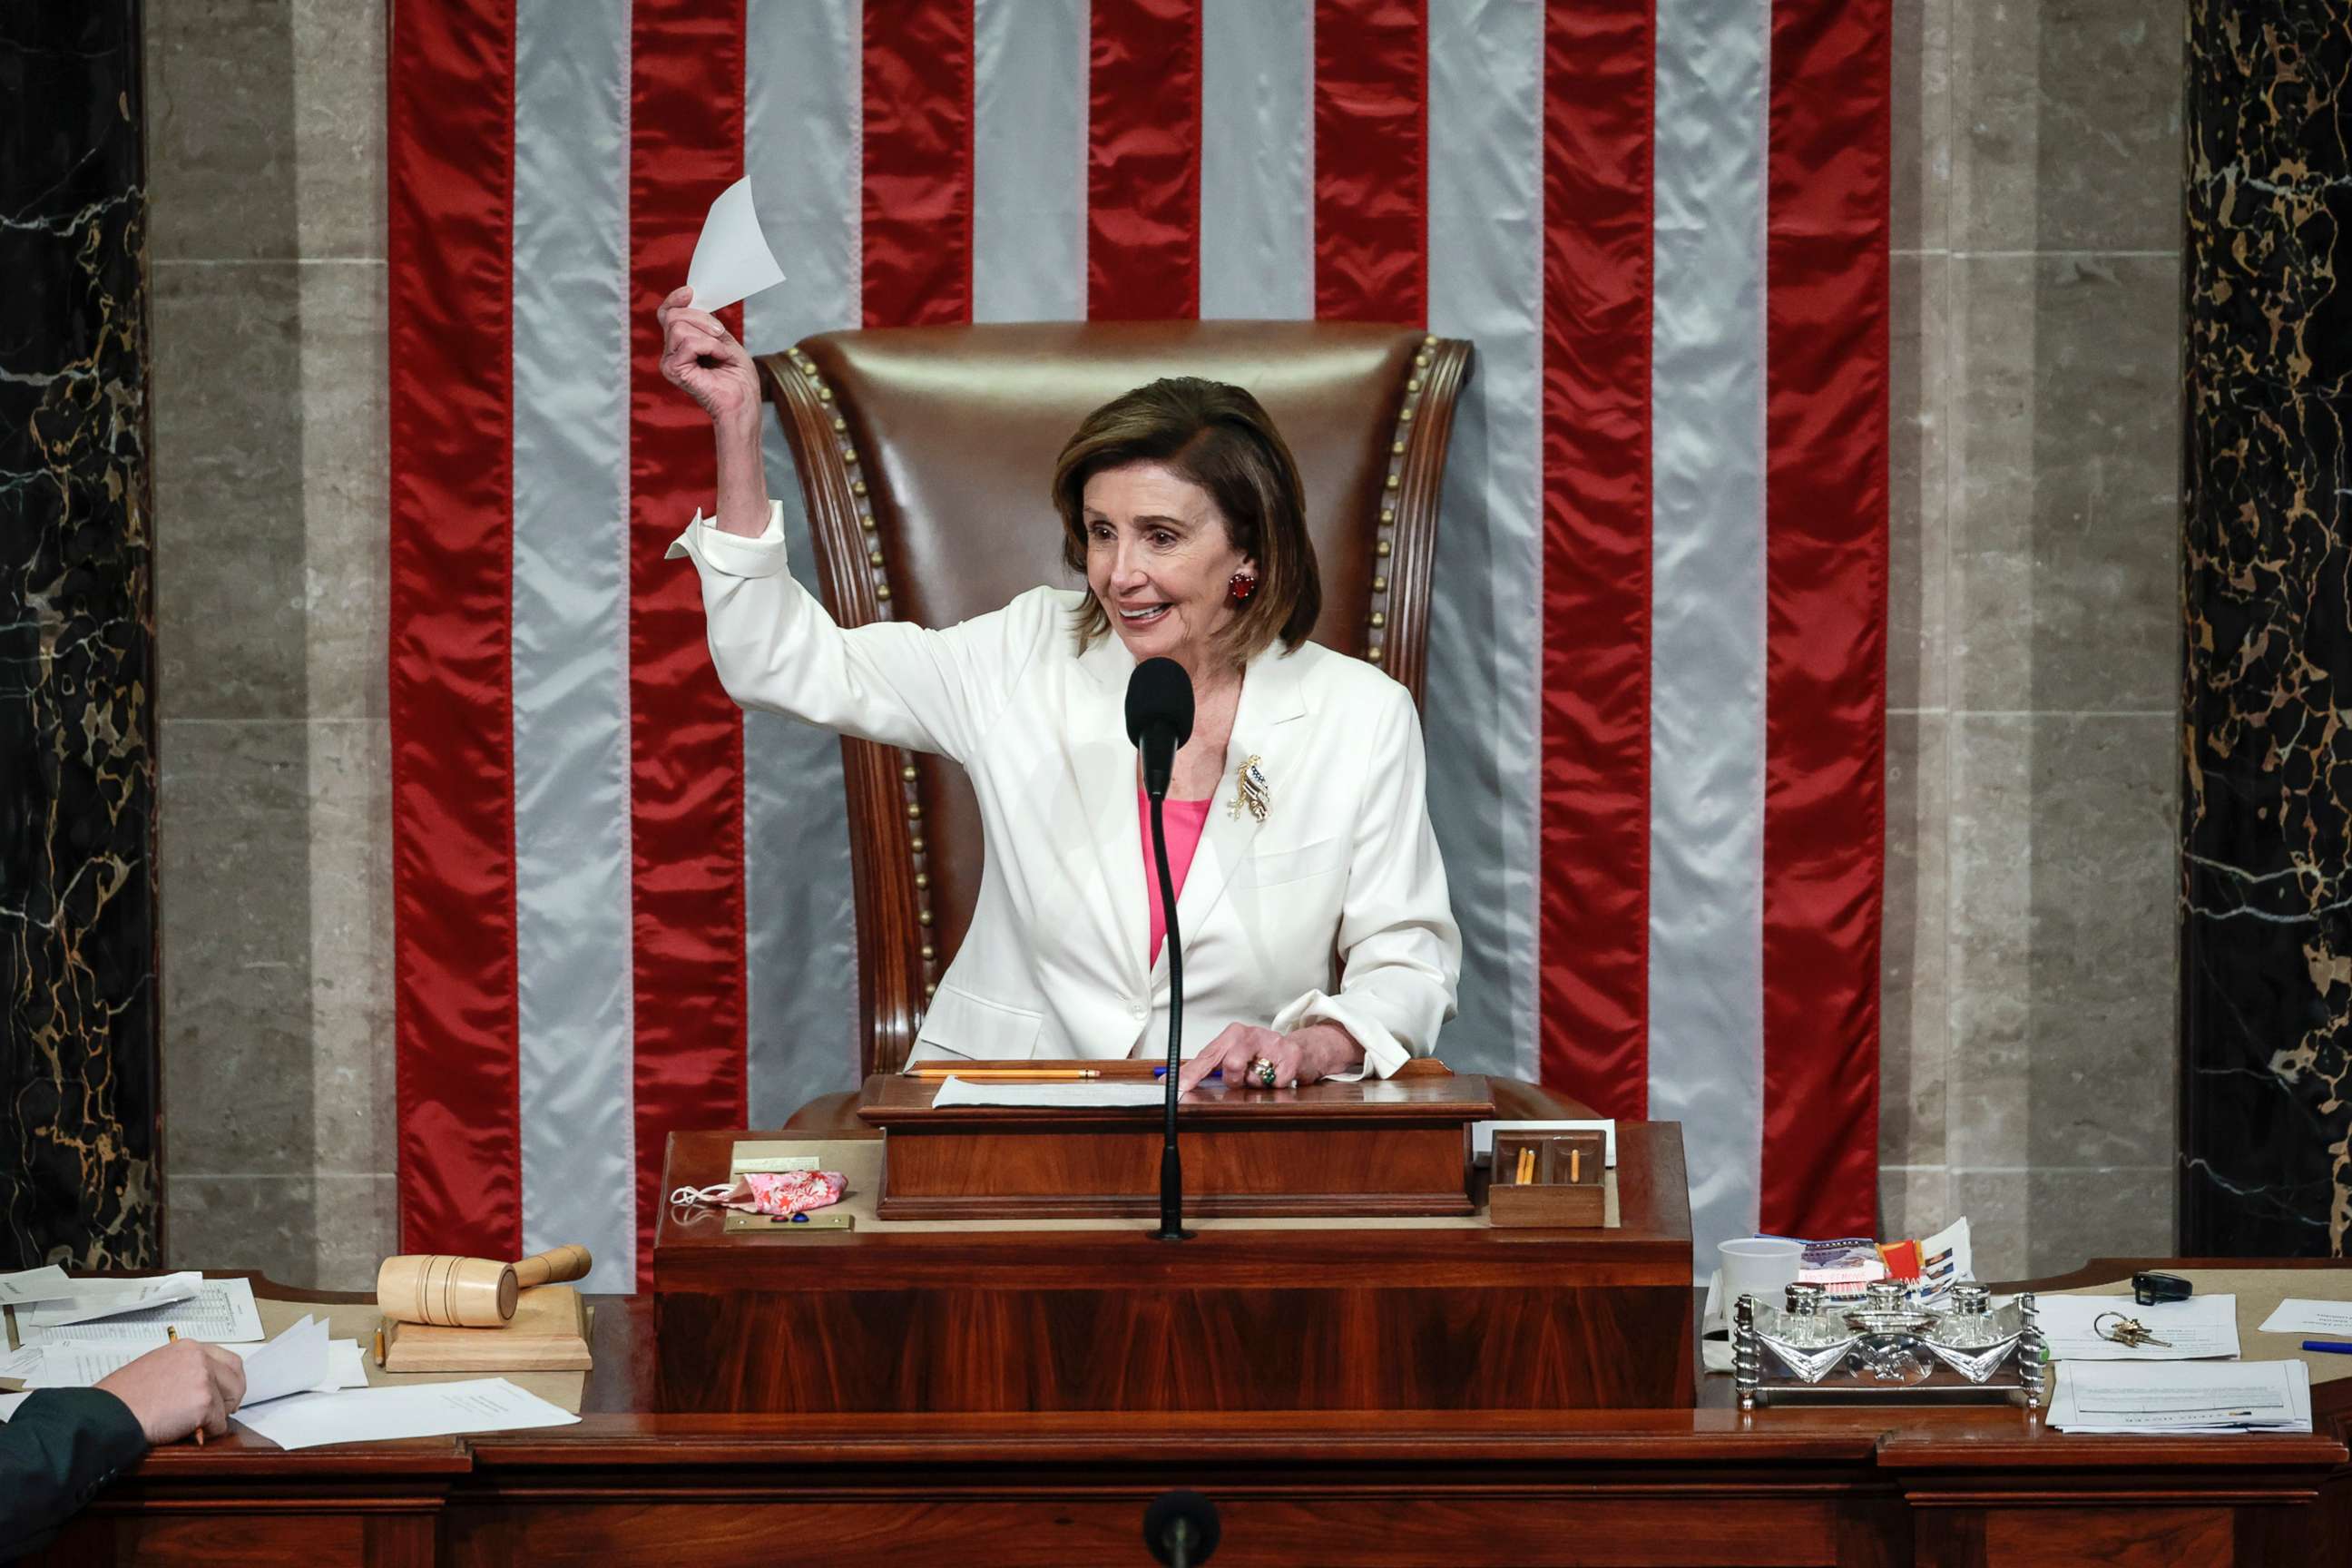 PHOTO: Speaker of the House Nancy Pelosi presides over the vote for the Build Back Better Act at the U.S. Capitol, Nov. 19, 2021, in Washington, D.C.